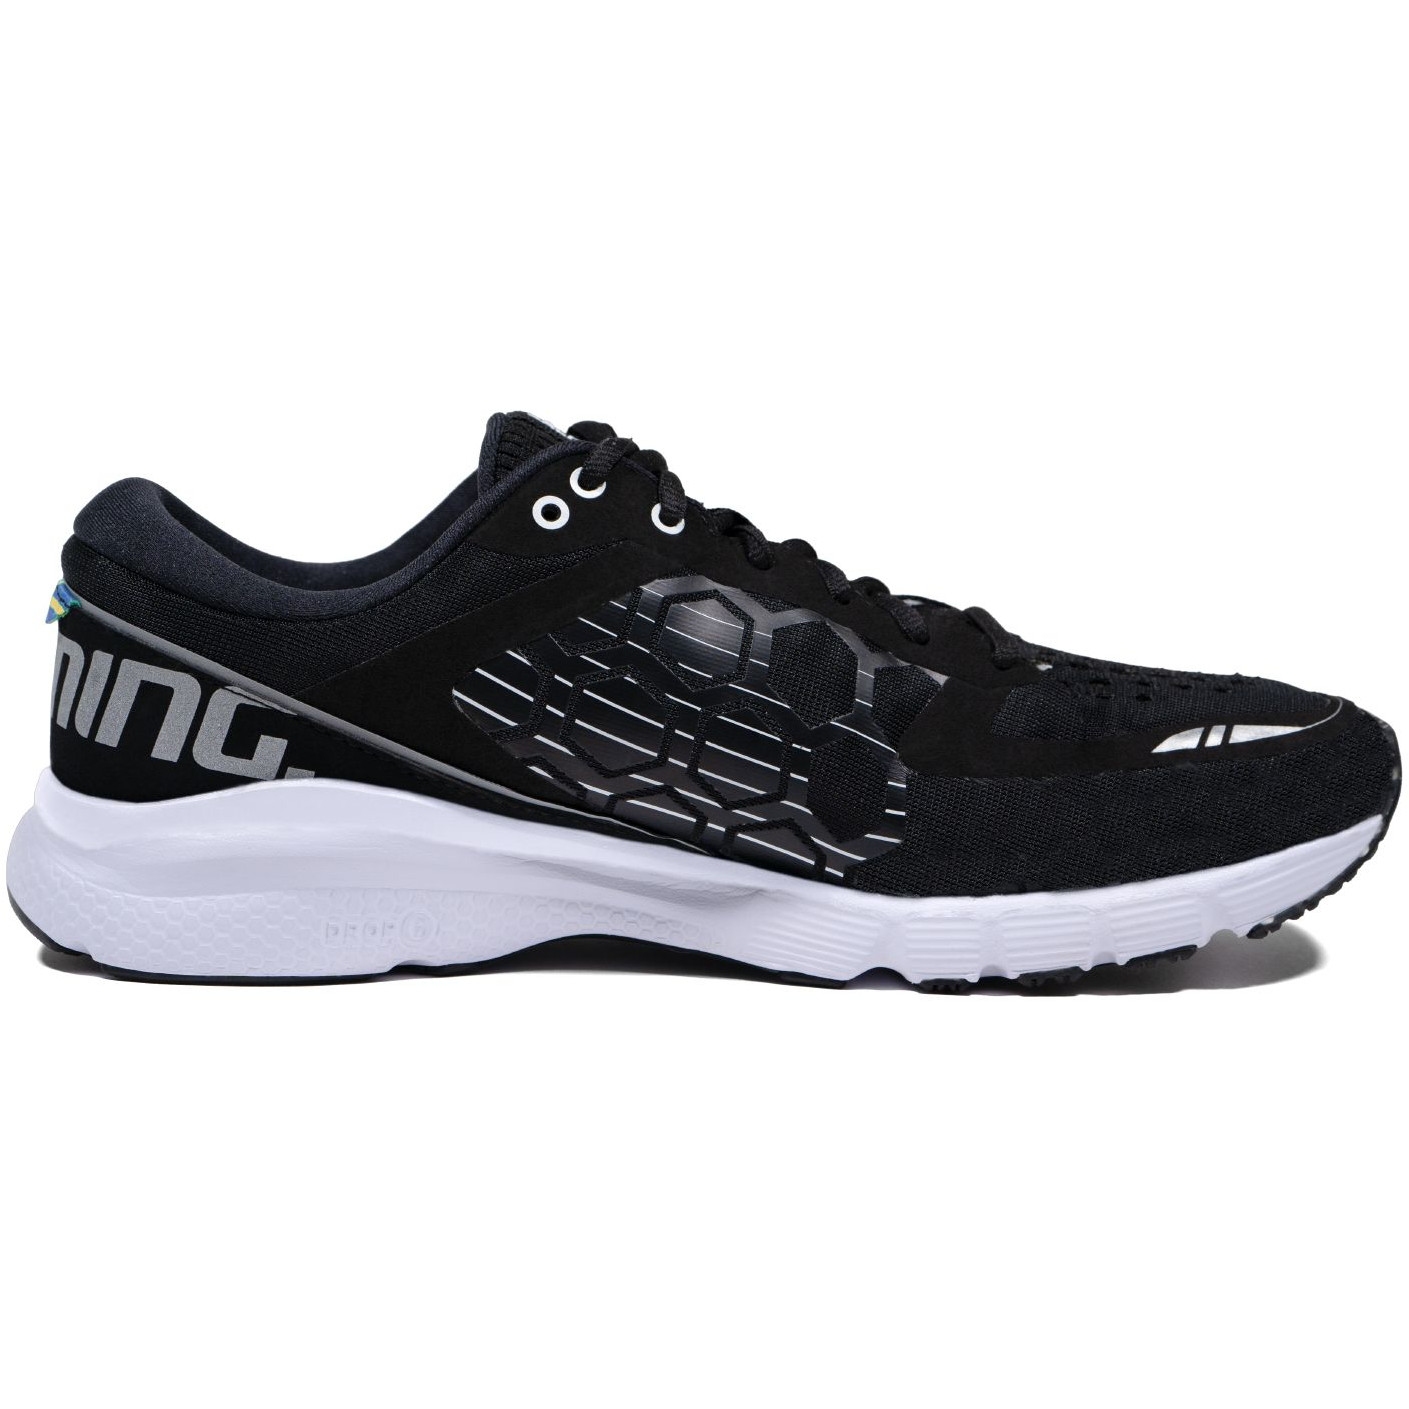 Image of Salming Recoil Lyte Shoes Women - Black/White